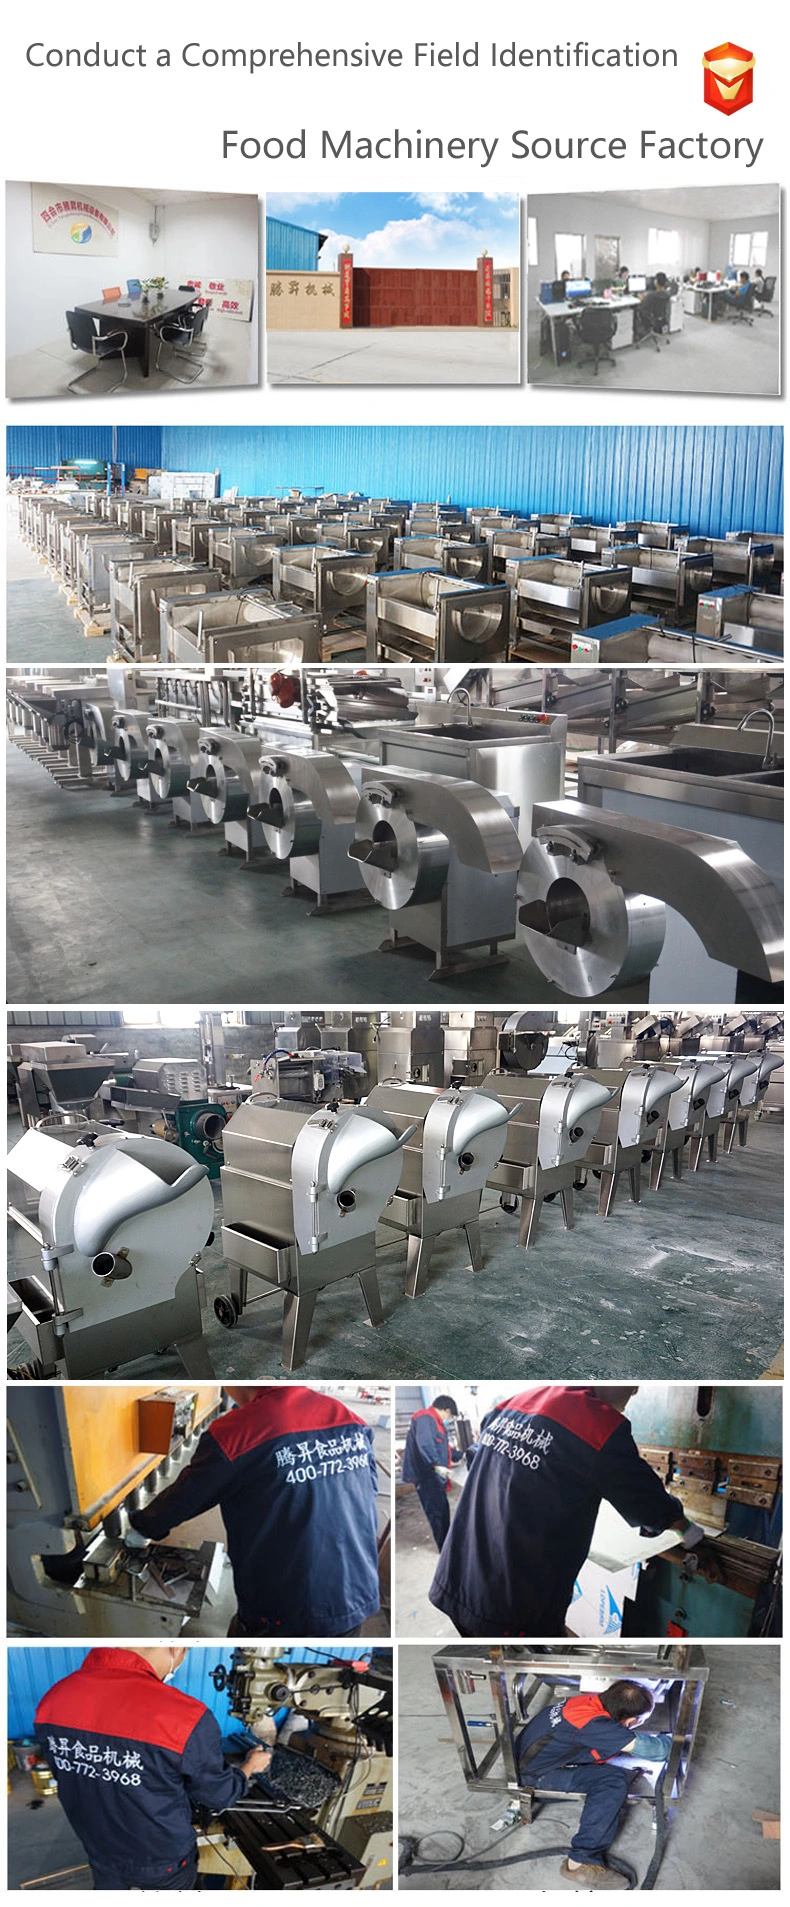 Hot Sale Multi-Functional Fruit and Vegetable Cutting Machine Suitable for Food Processing Plants (TS-Q1500)